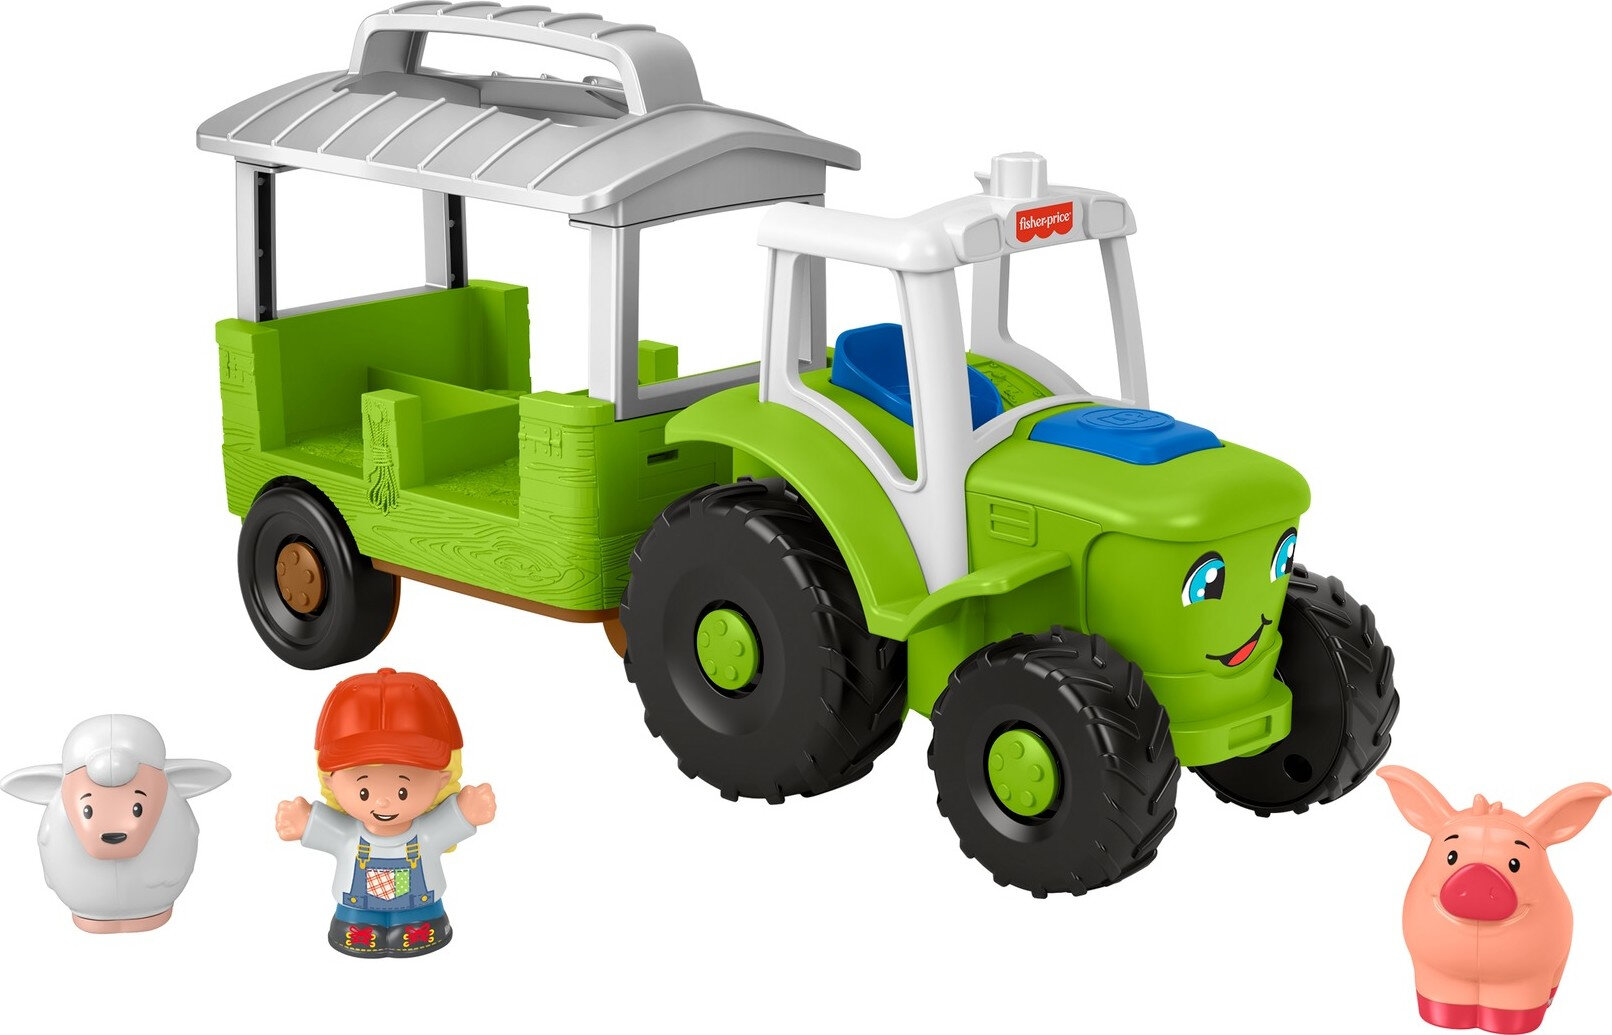 Fisher-Price Little People Caring for Animals Tractor Toddler Musical Farm Toy with 3 Figures - image 1 of 7